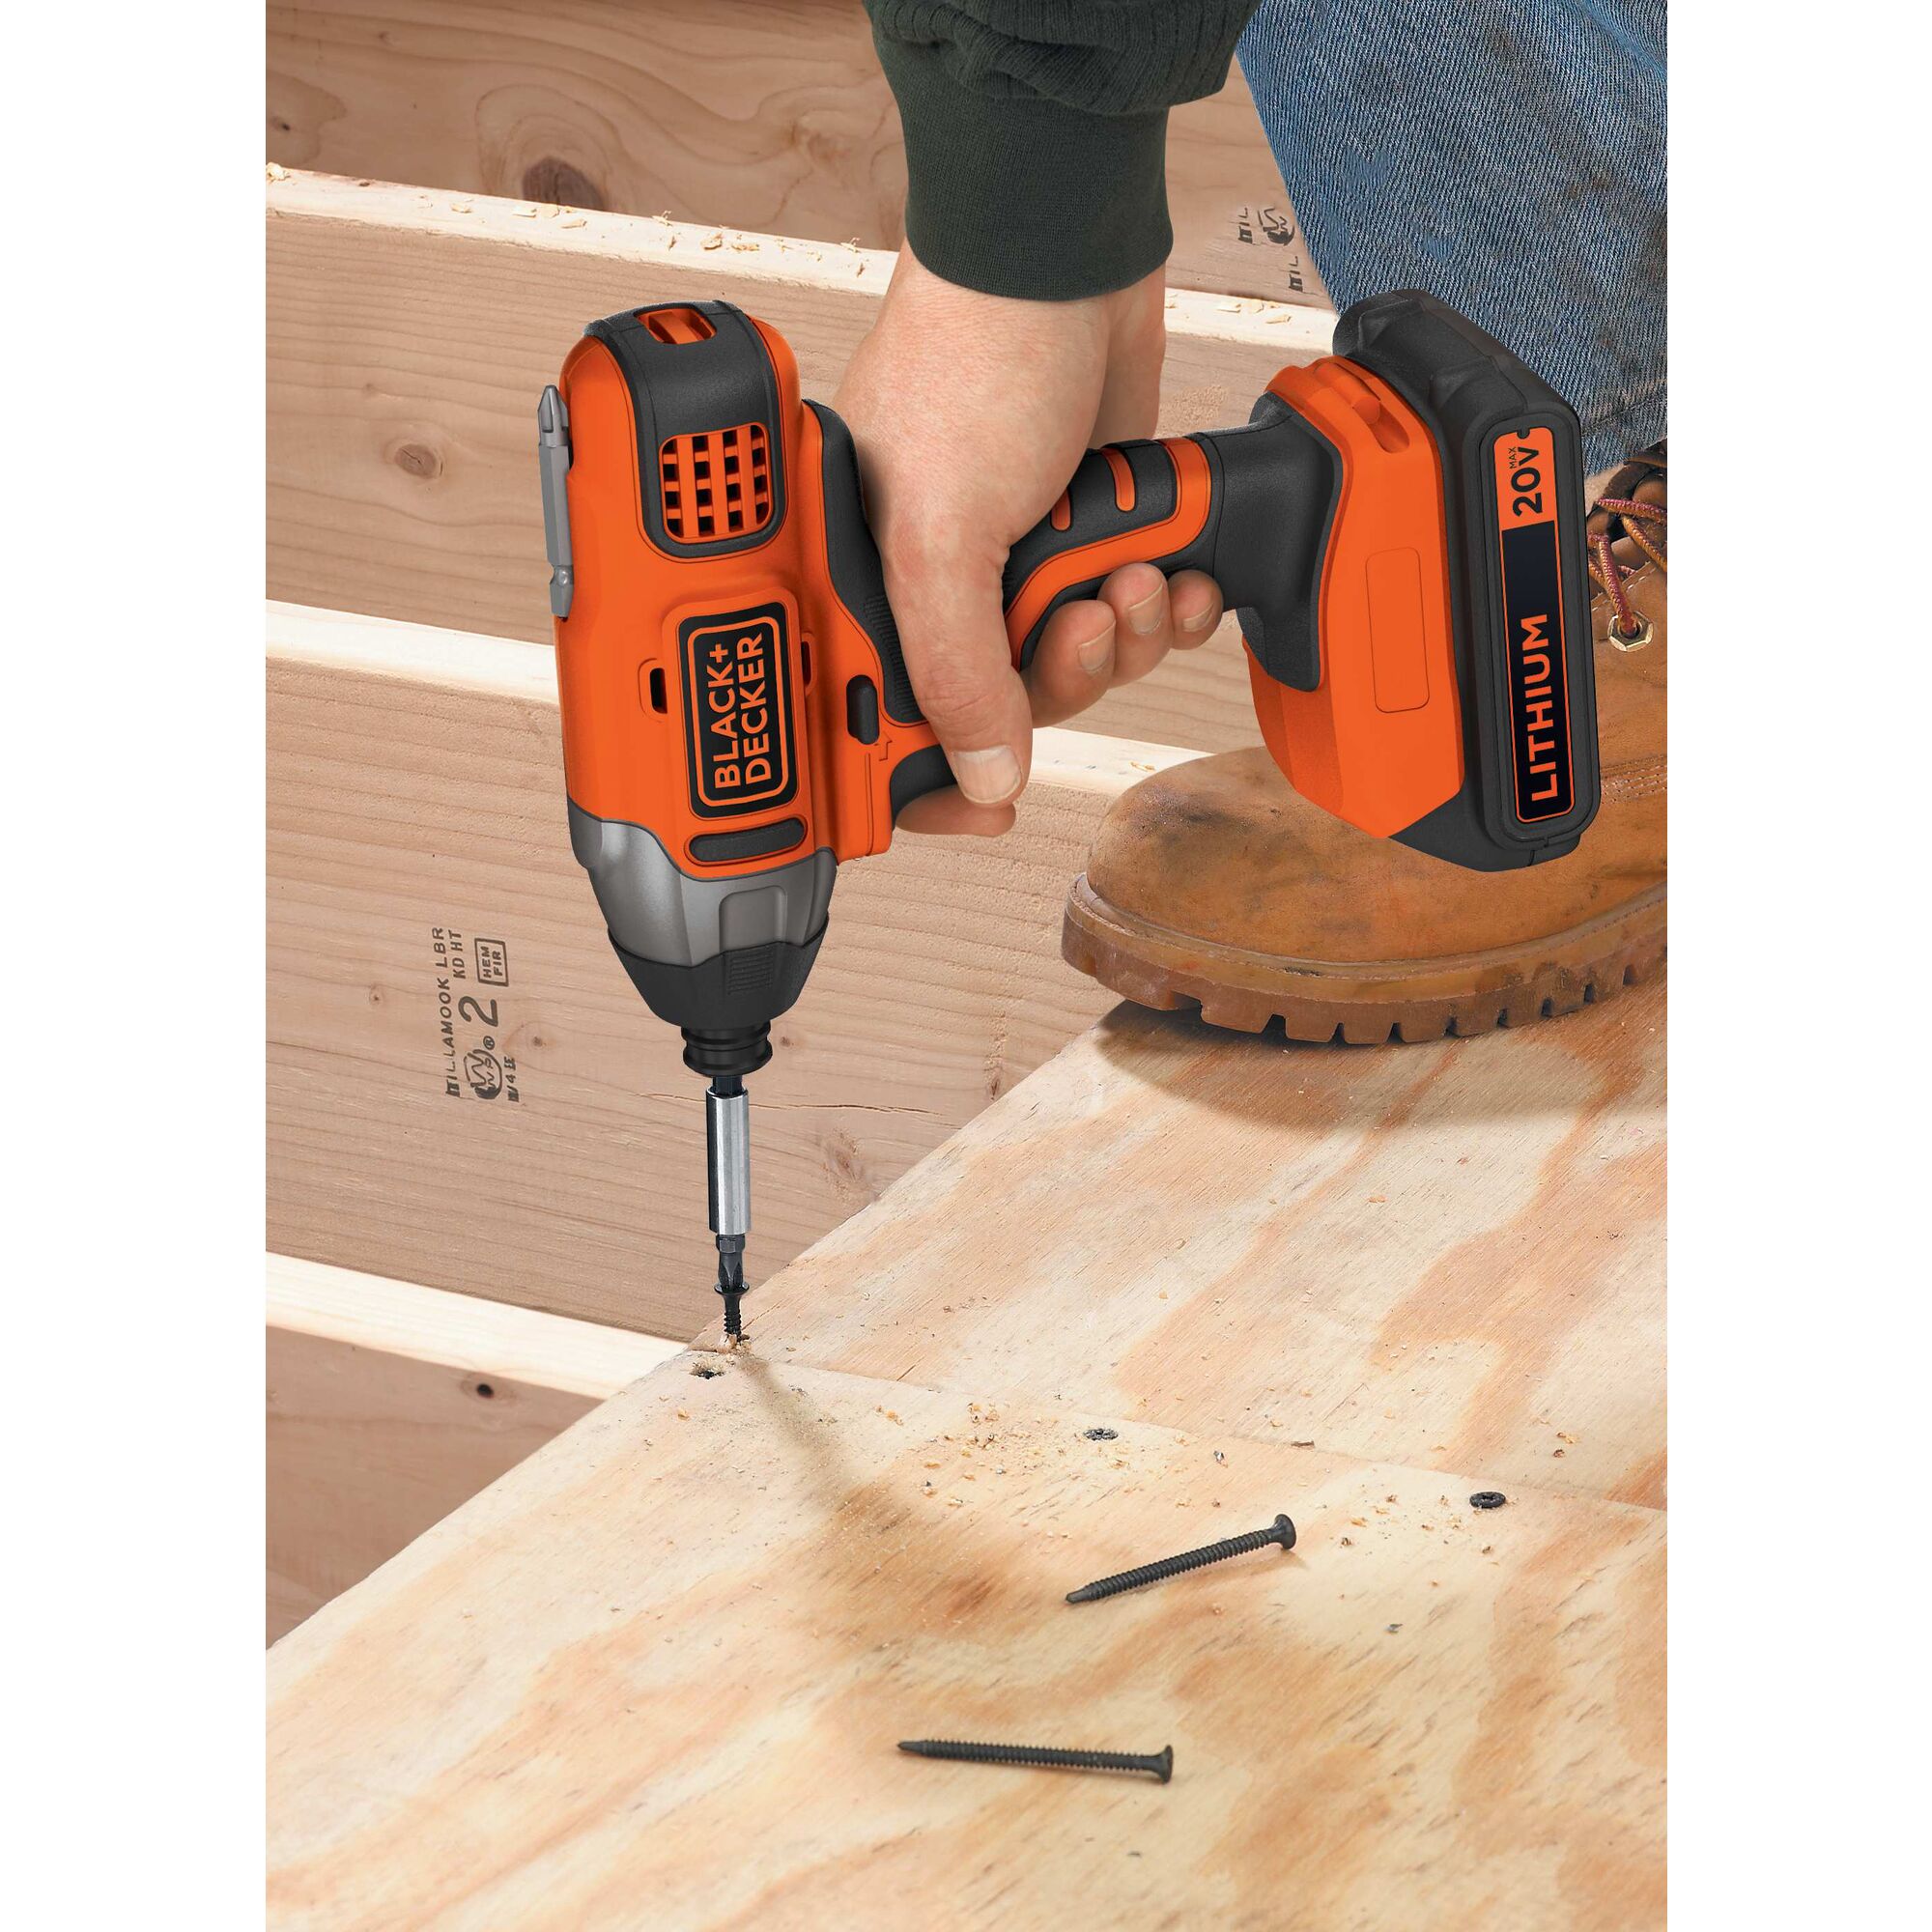 20 volt MAX lithium impact driver without battery and charger being used to drill hole in wood.